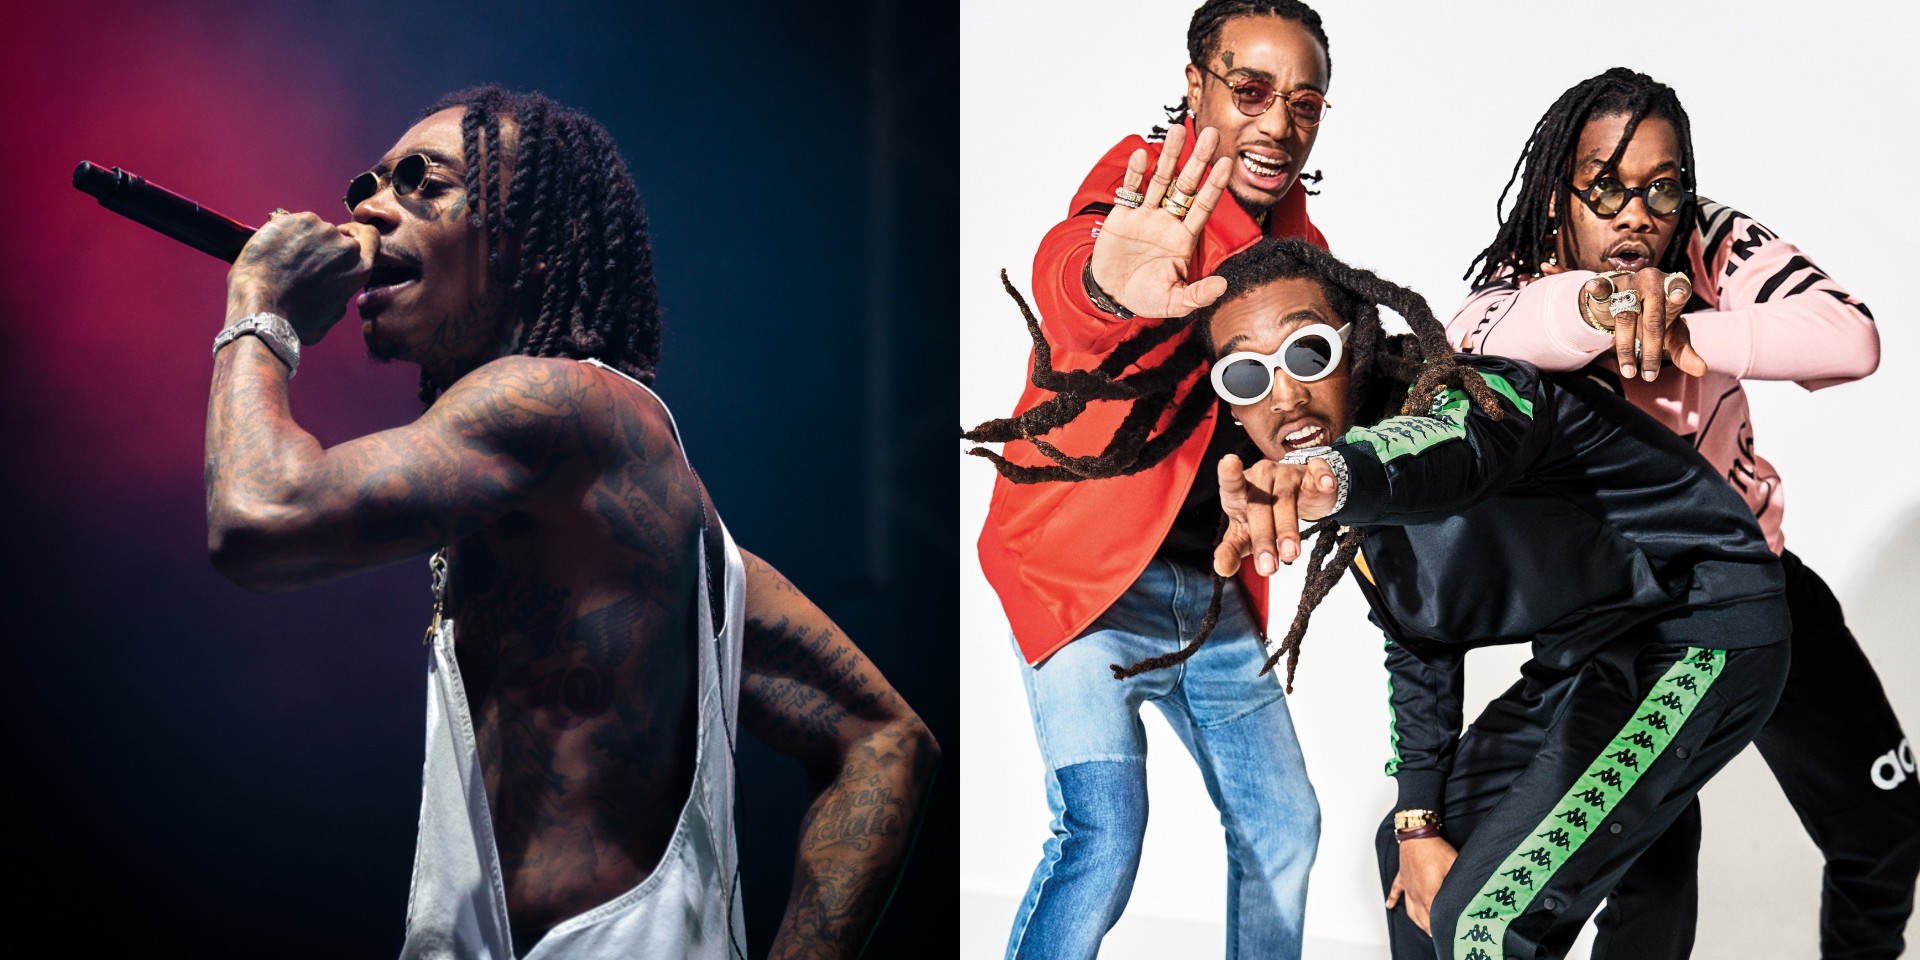 Rolling Loud Hong Kong line-up announced: Migos, Wiz Khalifa, and more